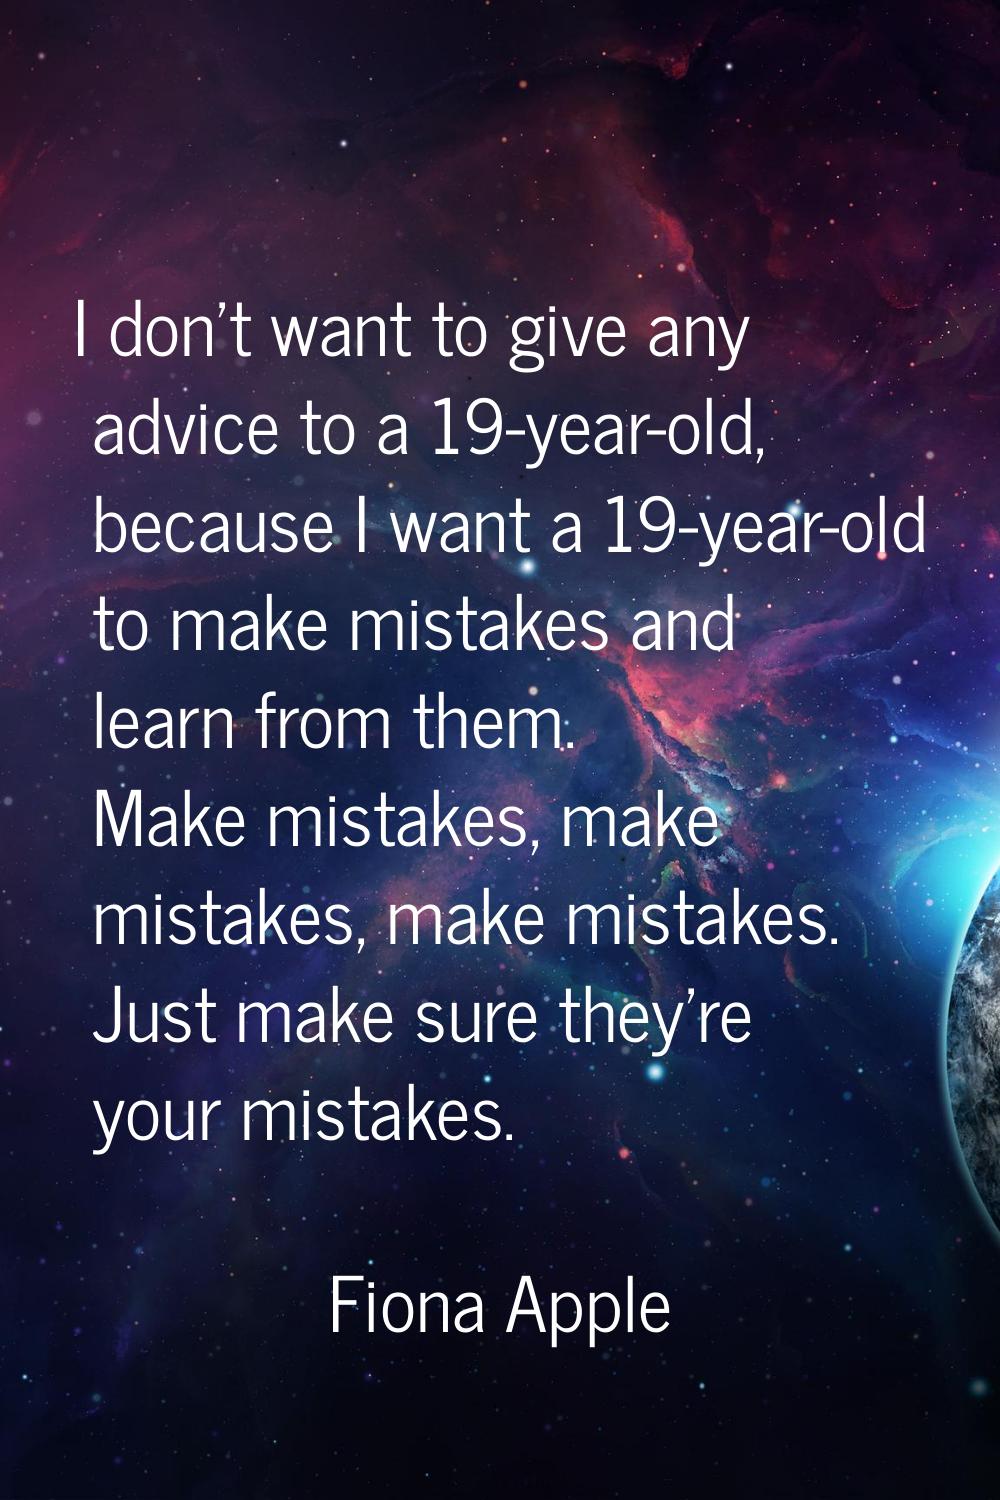 I don't want to give any advice to a 19-year-old, because I want a 19-year-old to make mistakes and